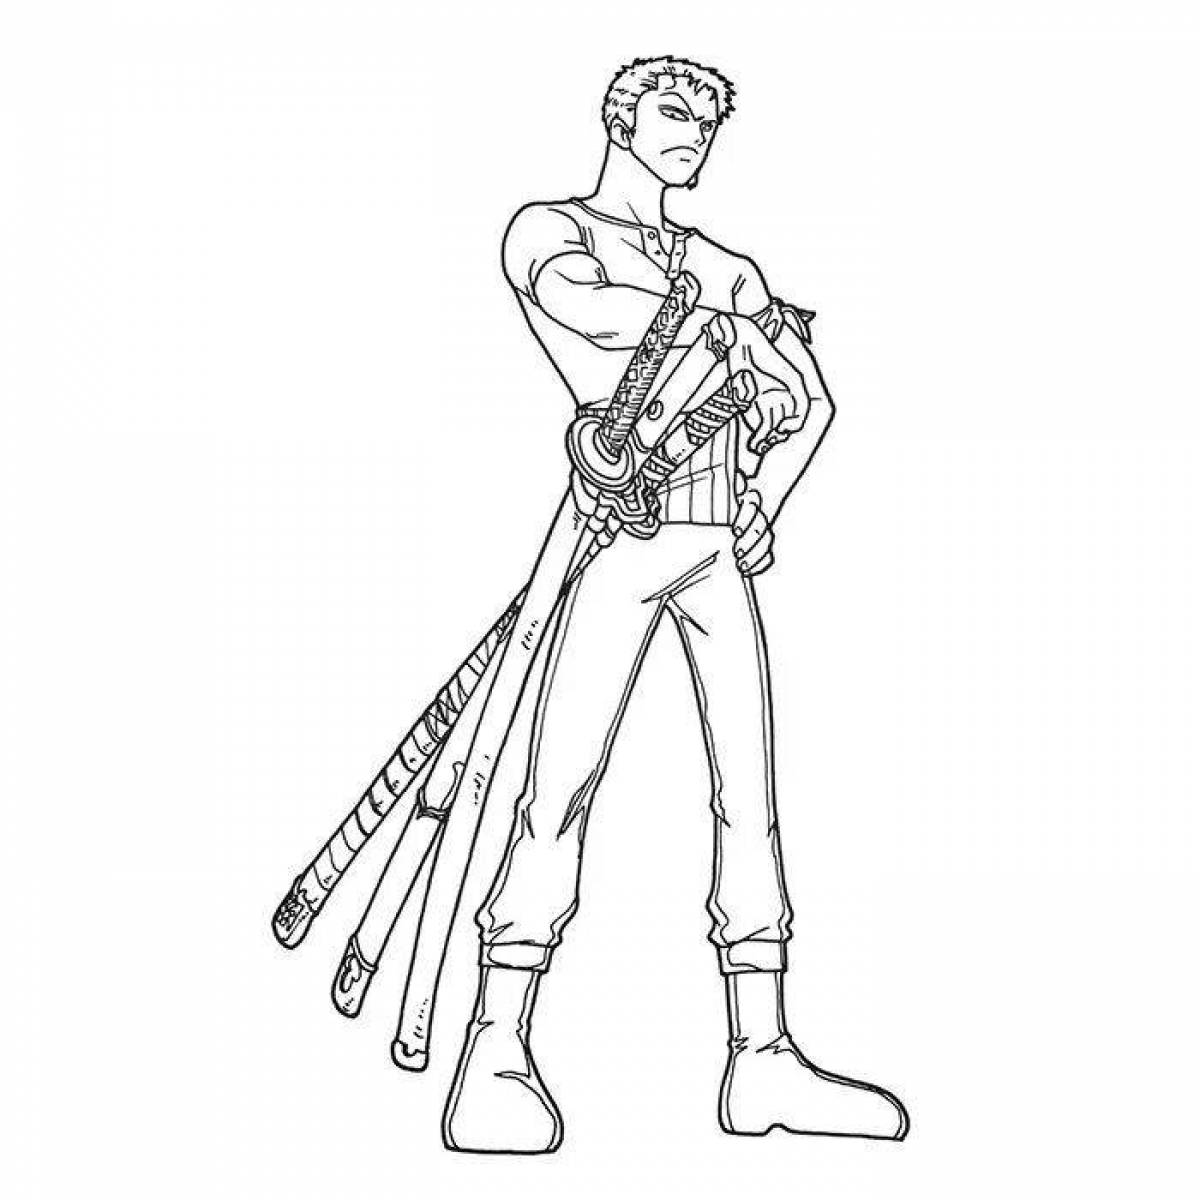 Zoro one piece incredible coloring page